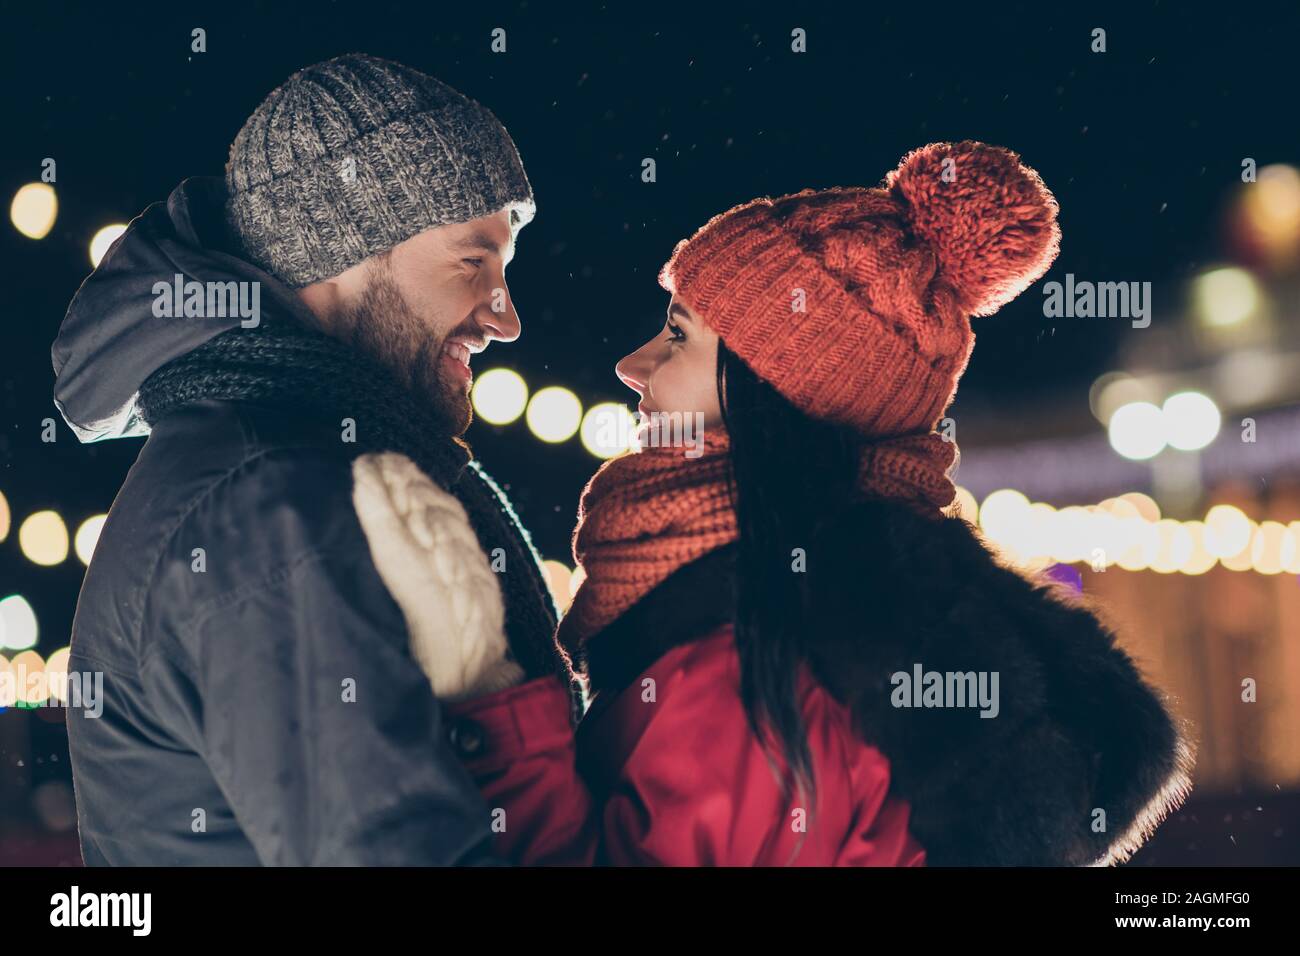 Photo of two affectionate people in love at midnight standing opposite looking eyes making newyear wish wearing warm jackets outside Stock Photo